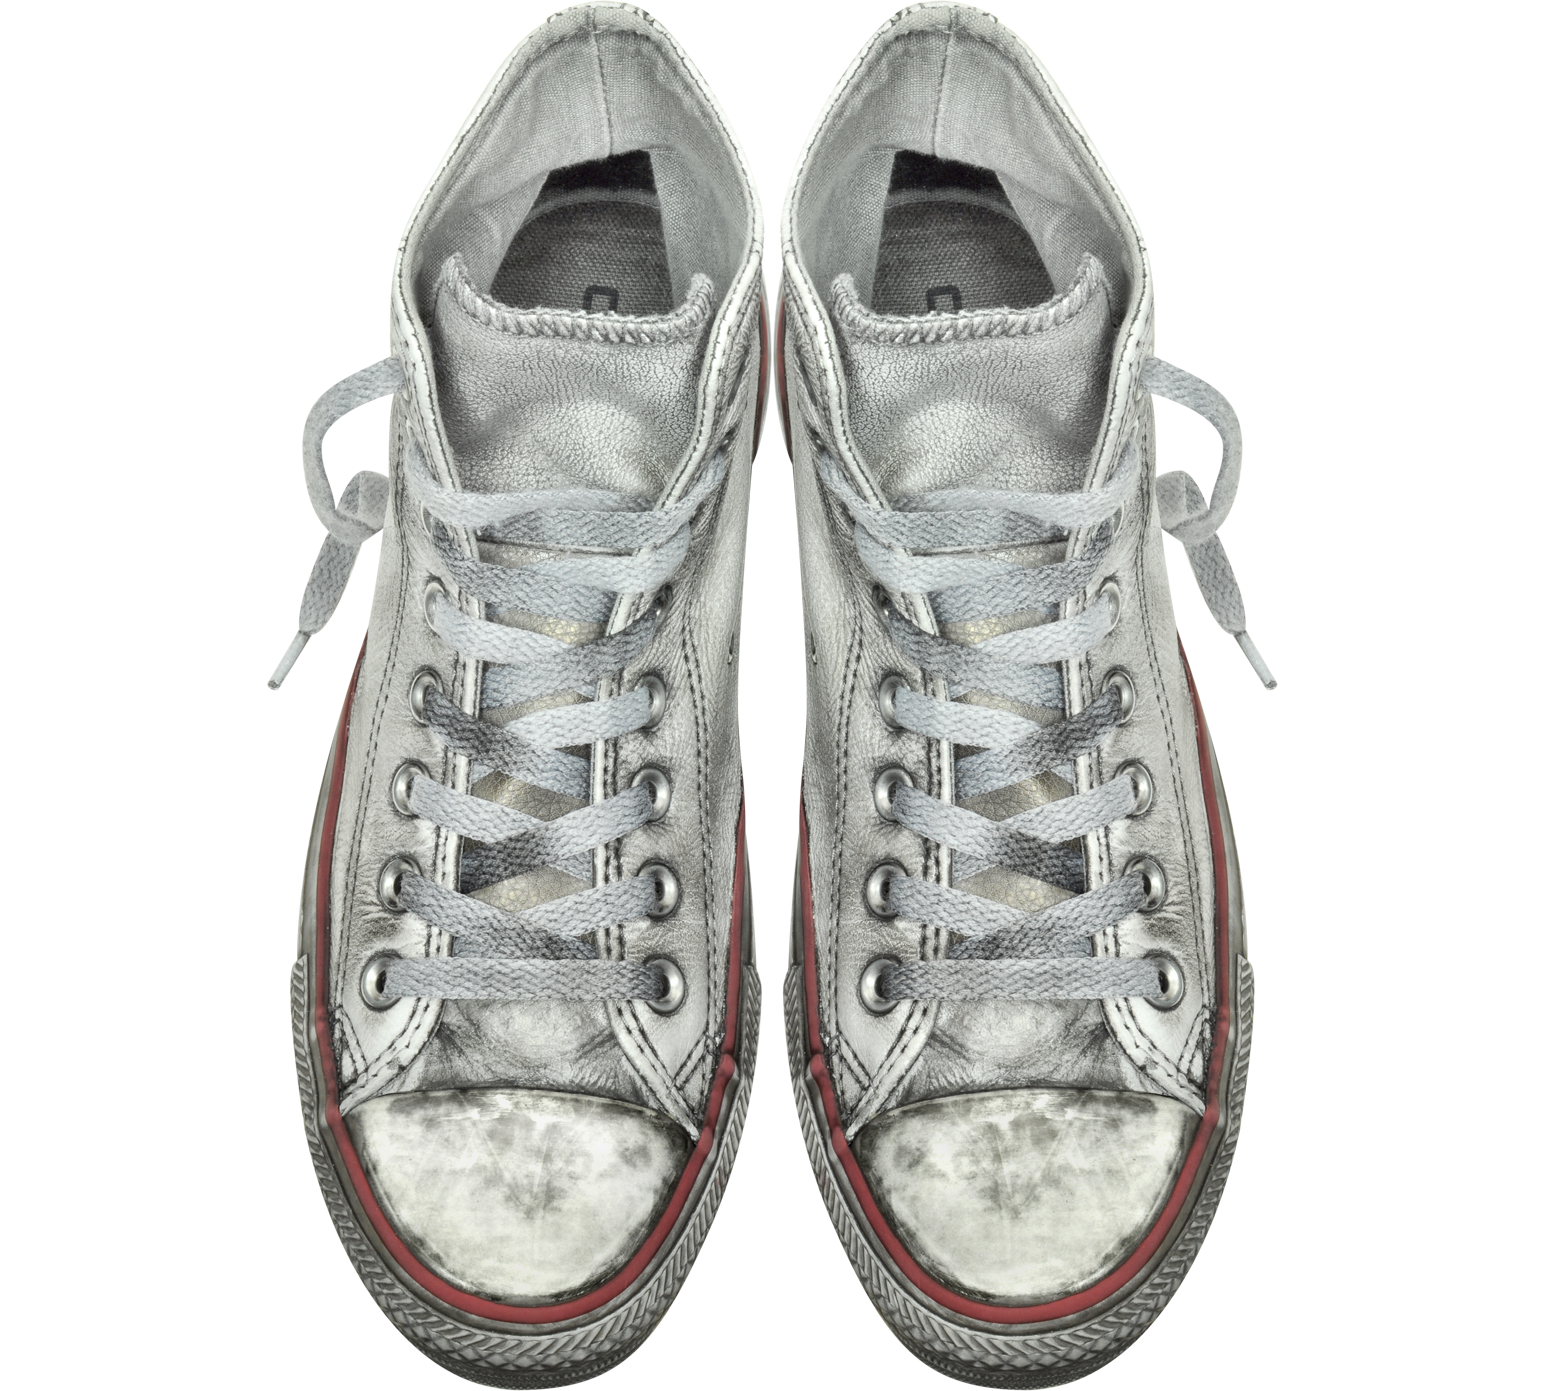 converse all star limited edition distressed smoke grey